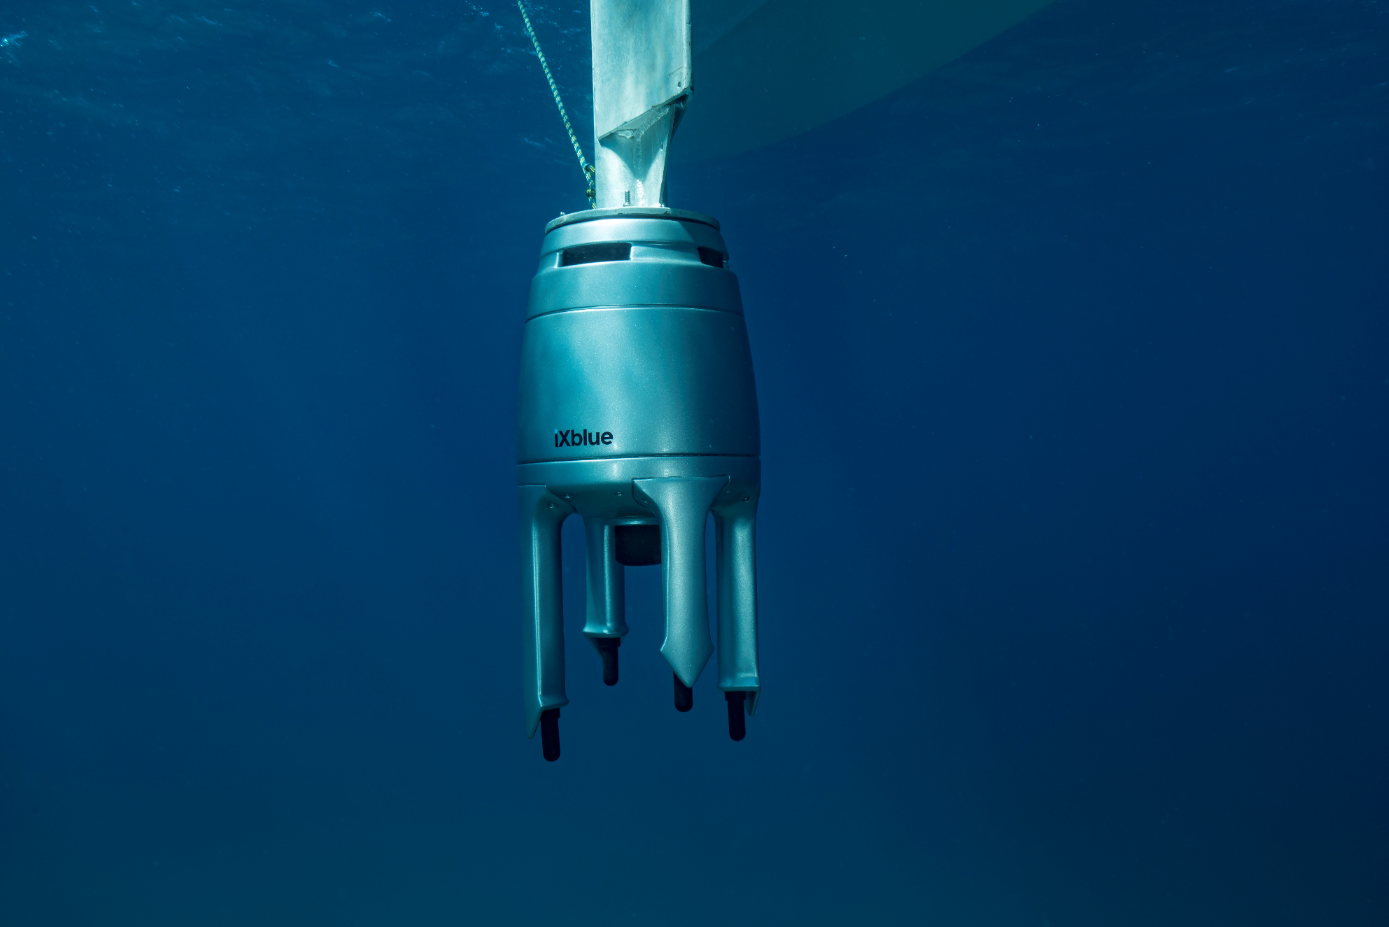 DGA Taps Ixblue For AUV Positioning & Monitoring